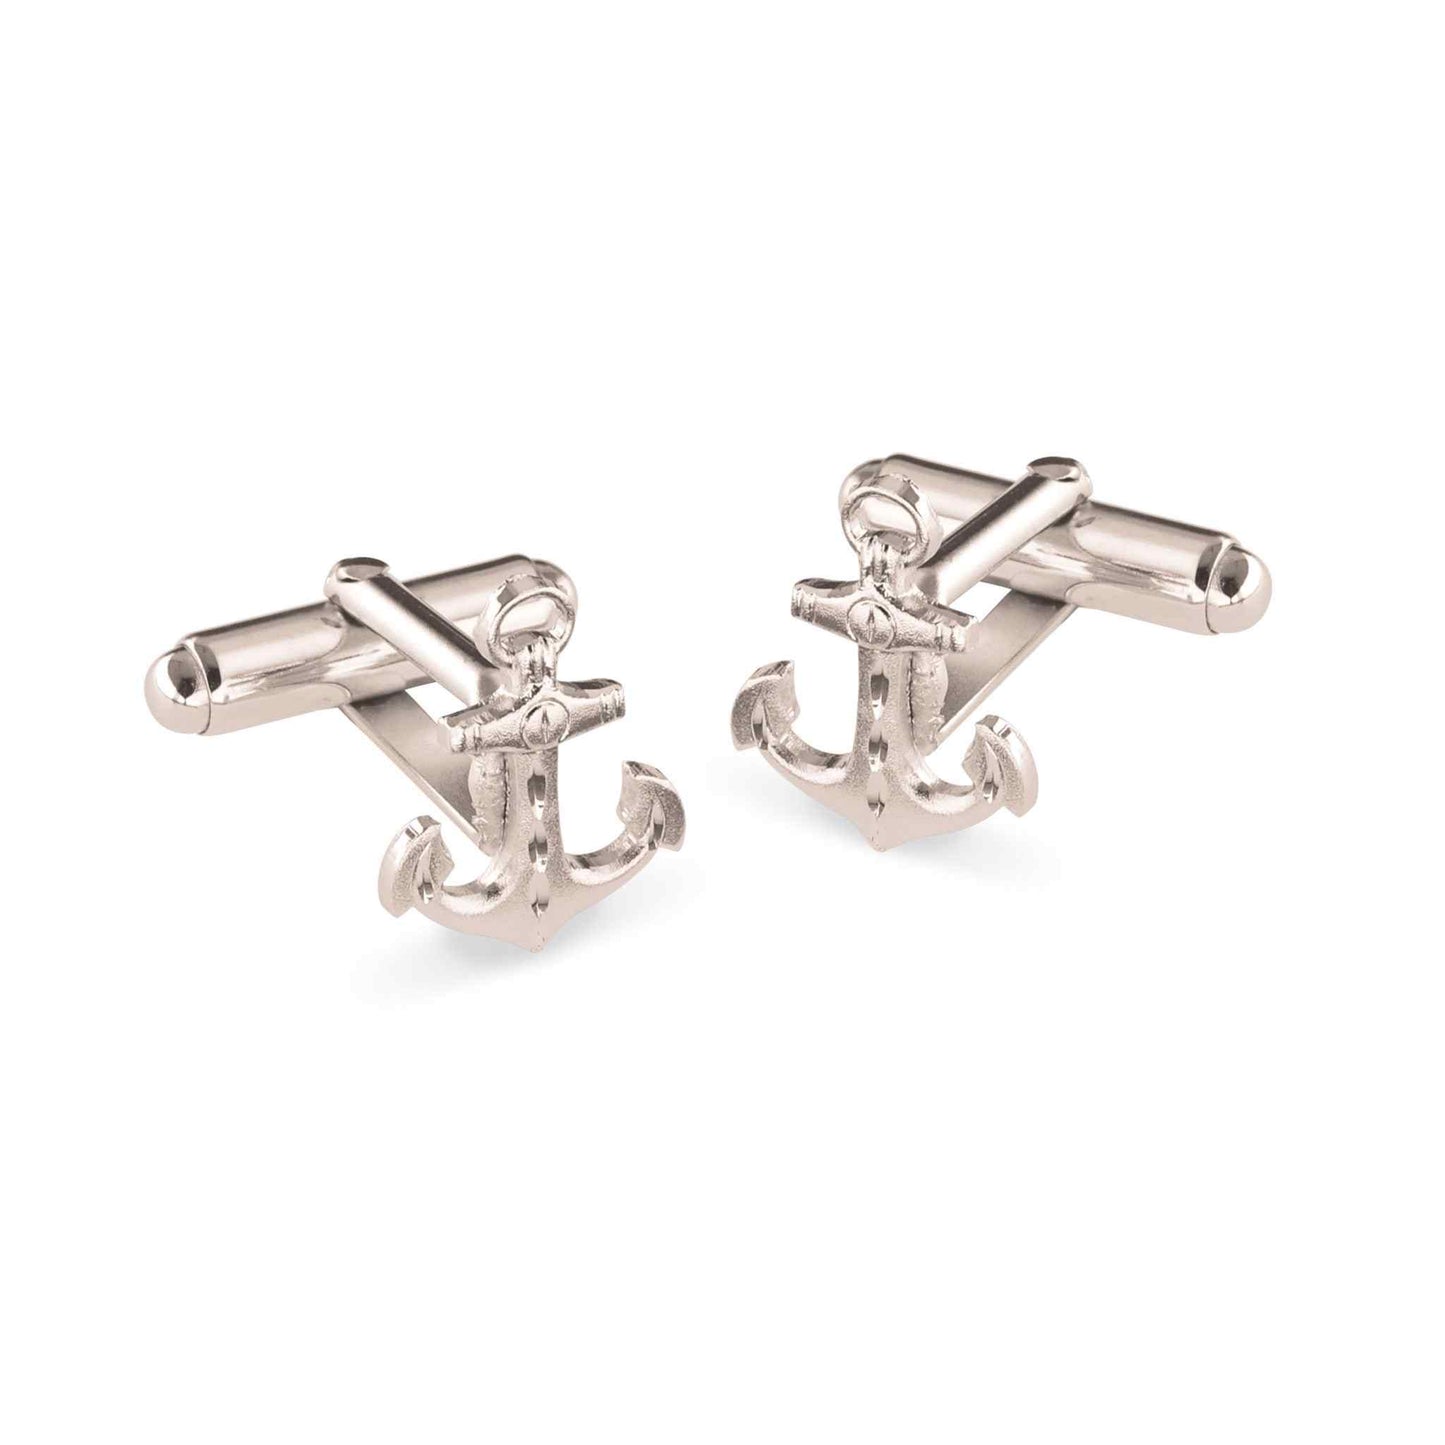 A anchor cufflinks displayed on a neutral white background.